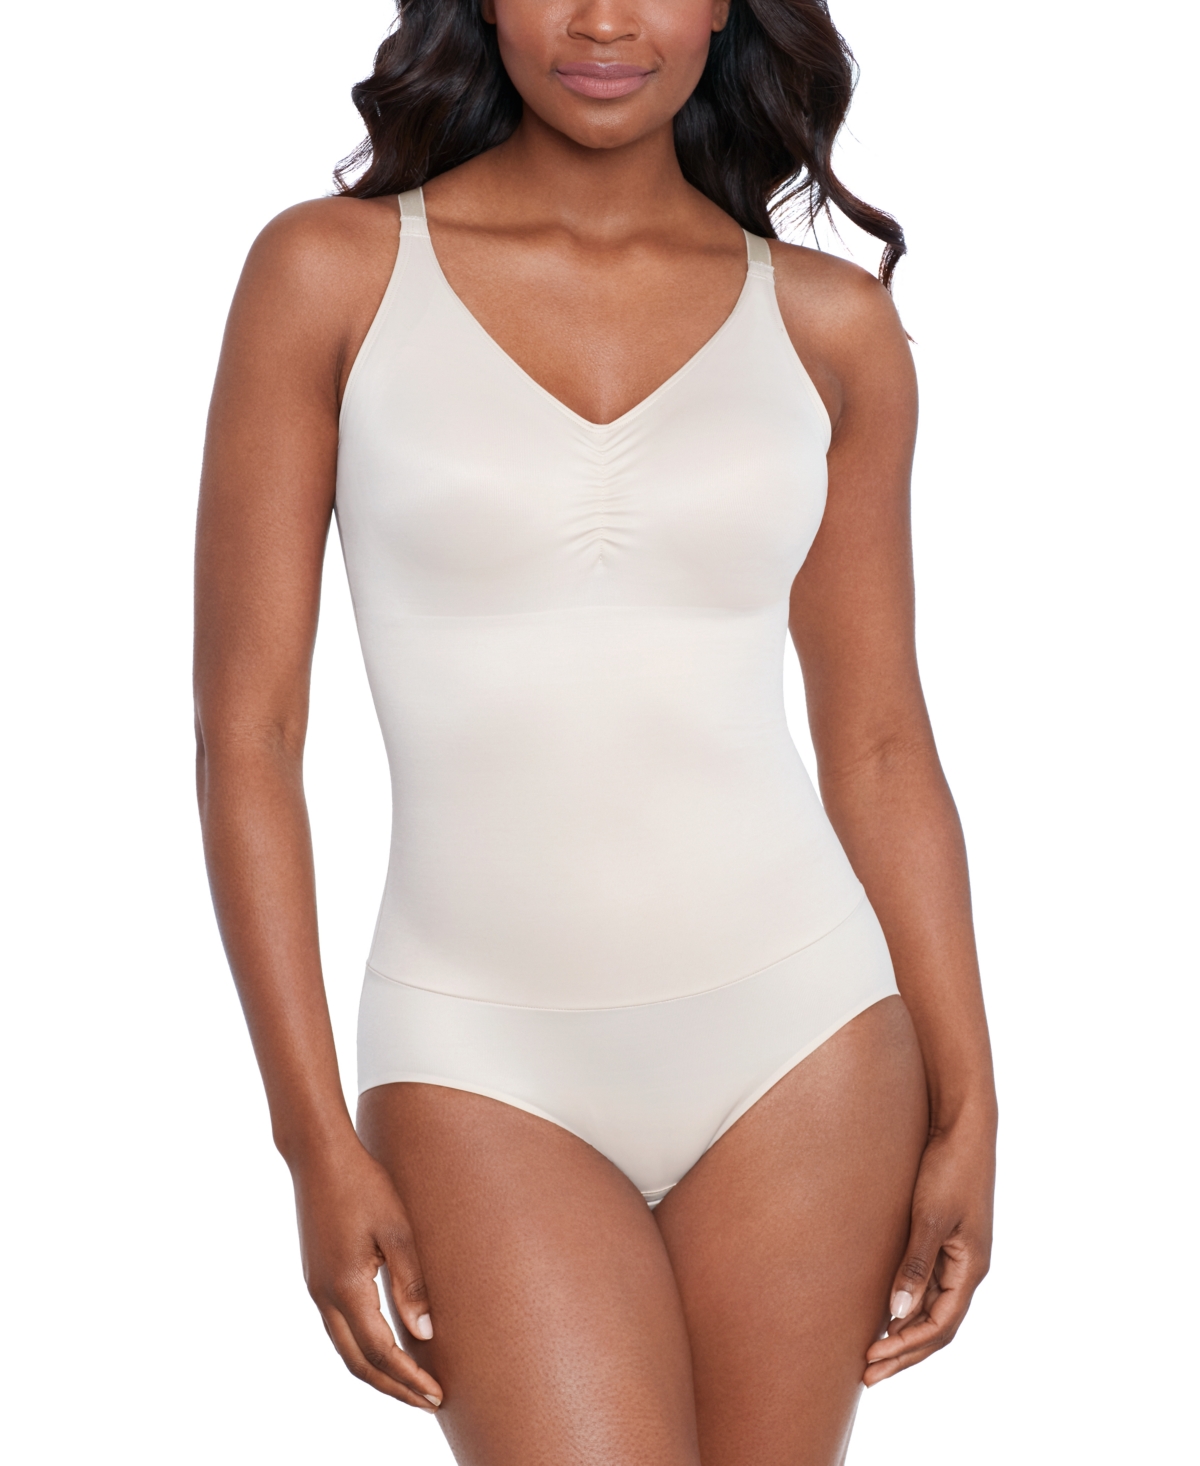 Miraclesuit Women's Shapewear Firm Comfy Curves Wireless Bodybriefer 2510